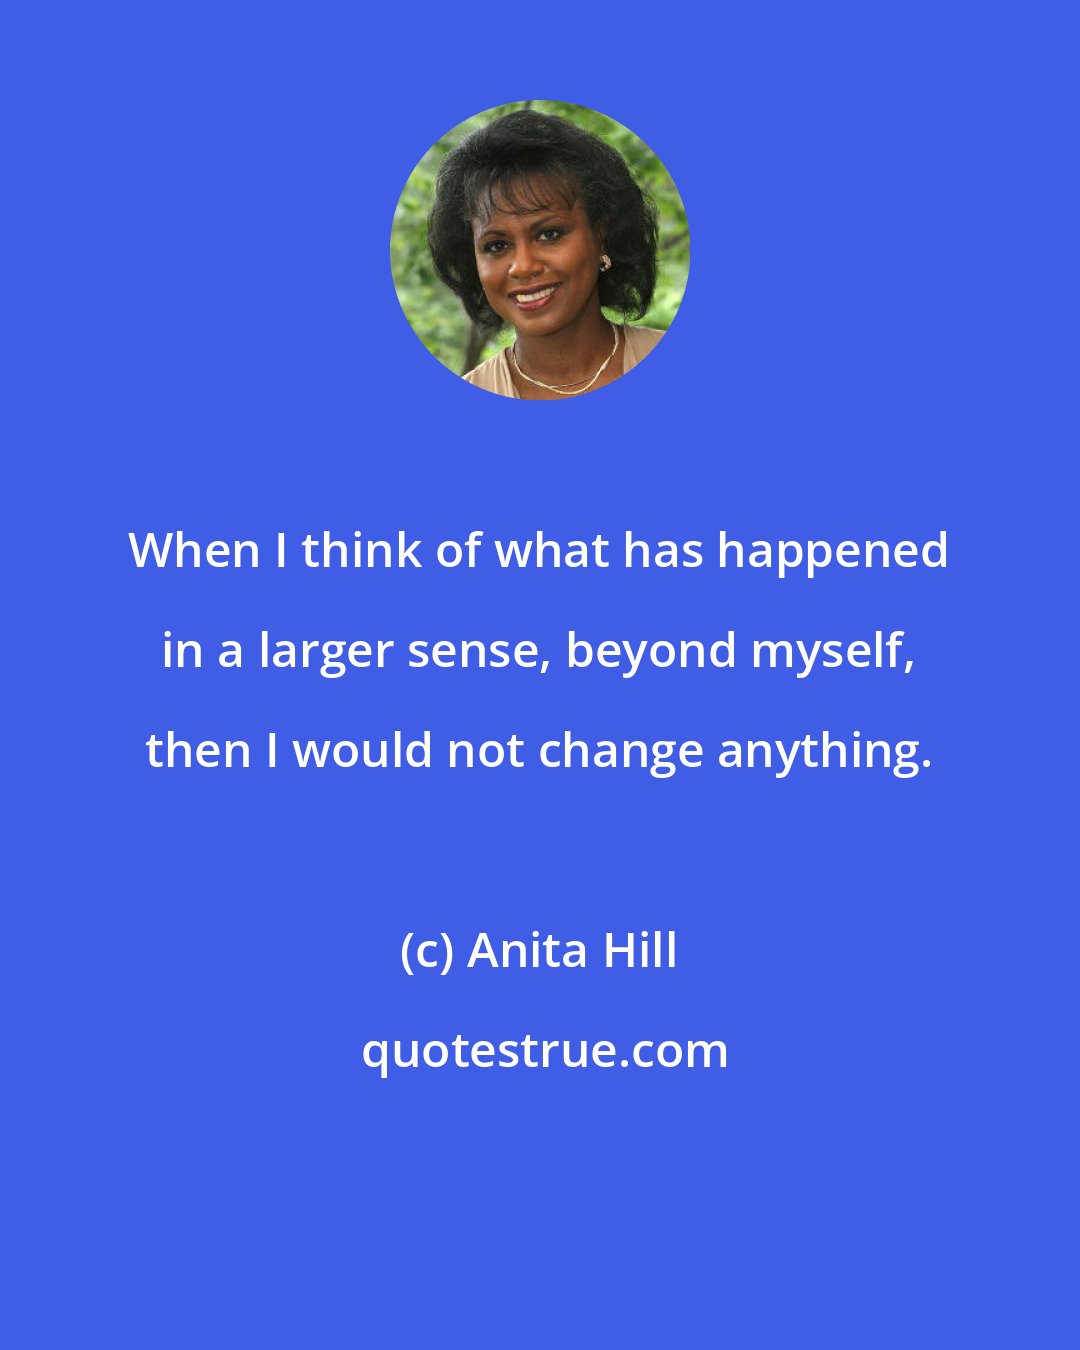 Anita Hill: When I think of what has happened in a larger sense, beyond myself, then I would not change anything.